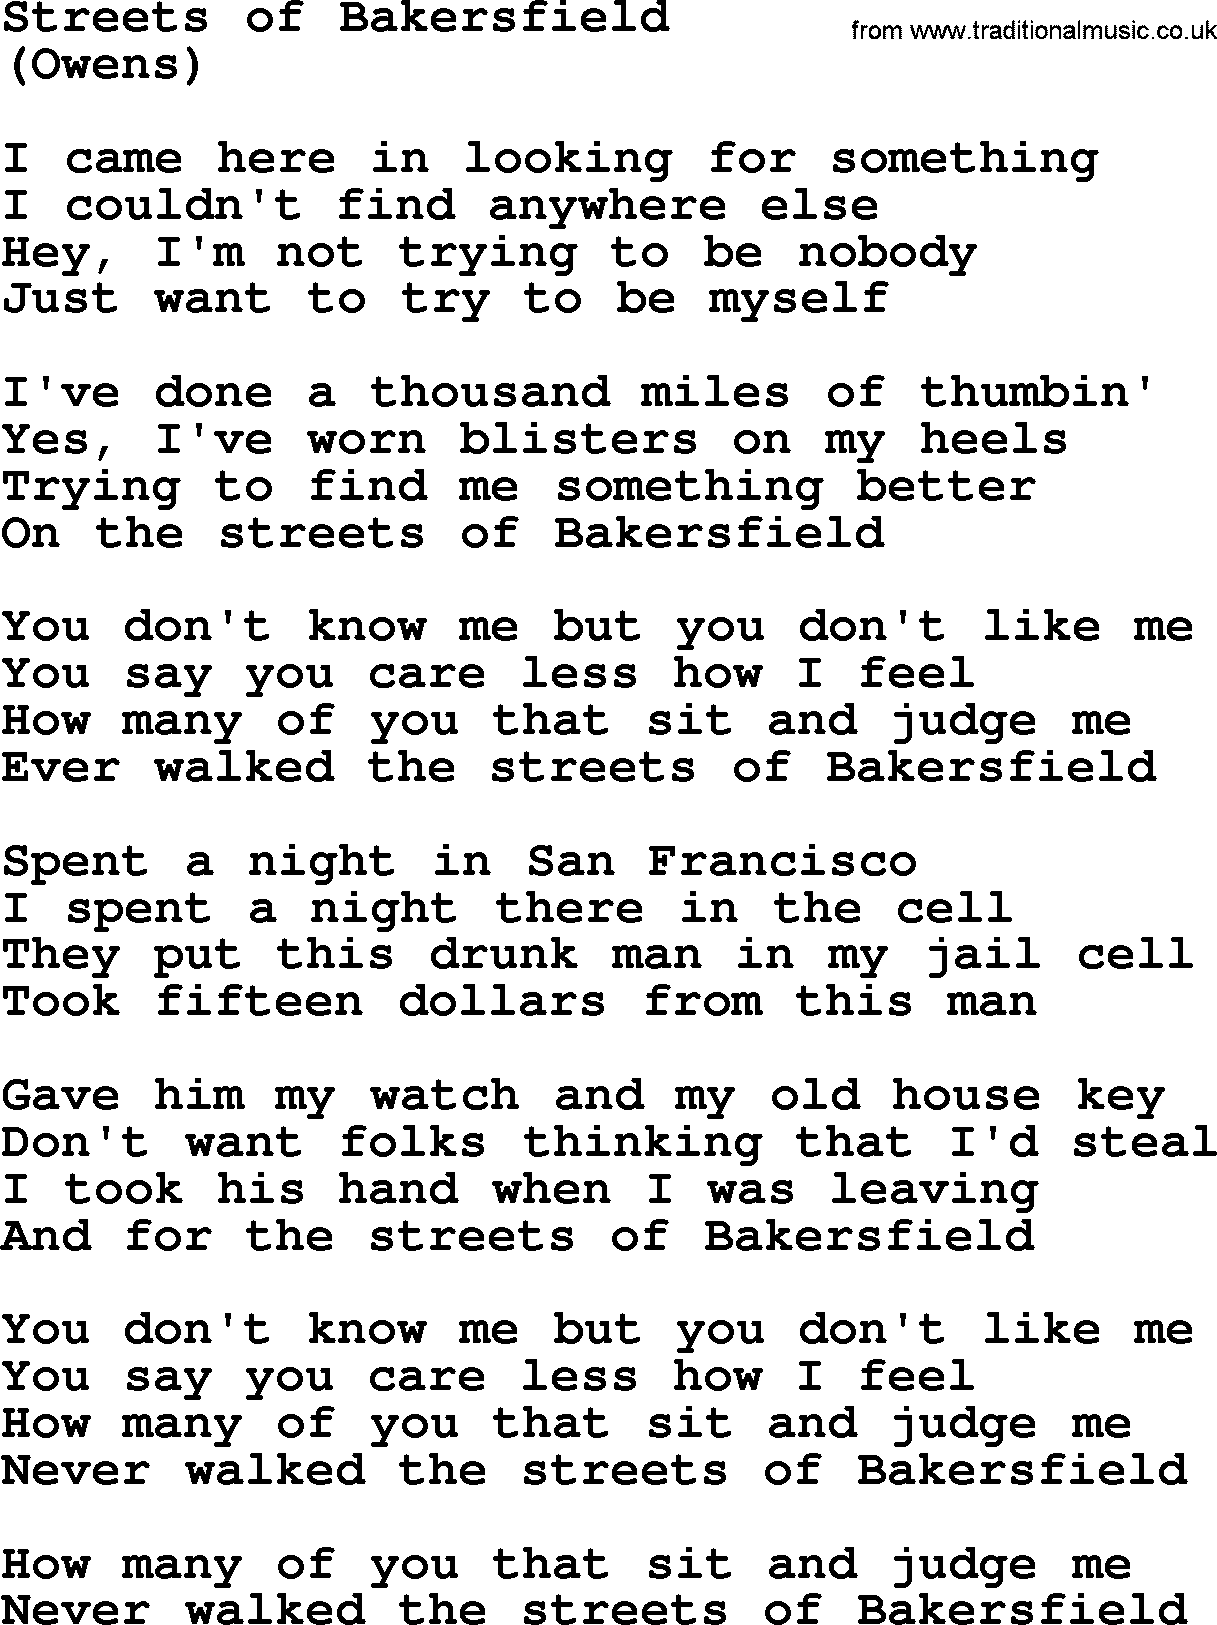 The Byrds song Streets Of Bakersfield, lyrics